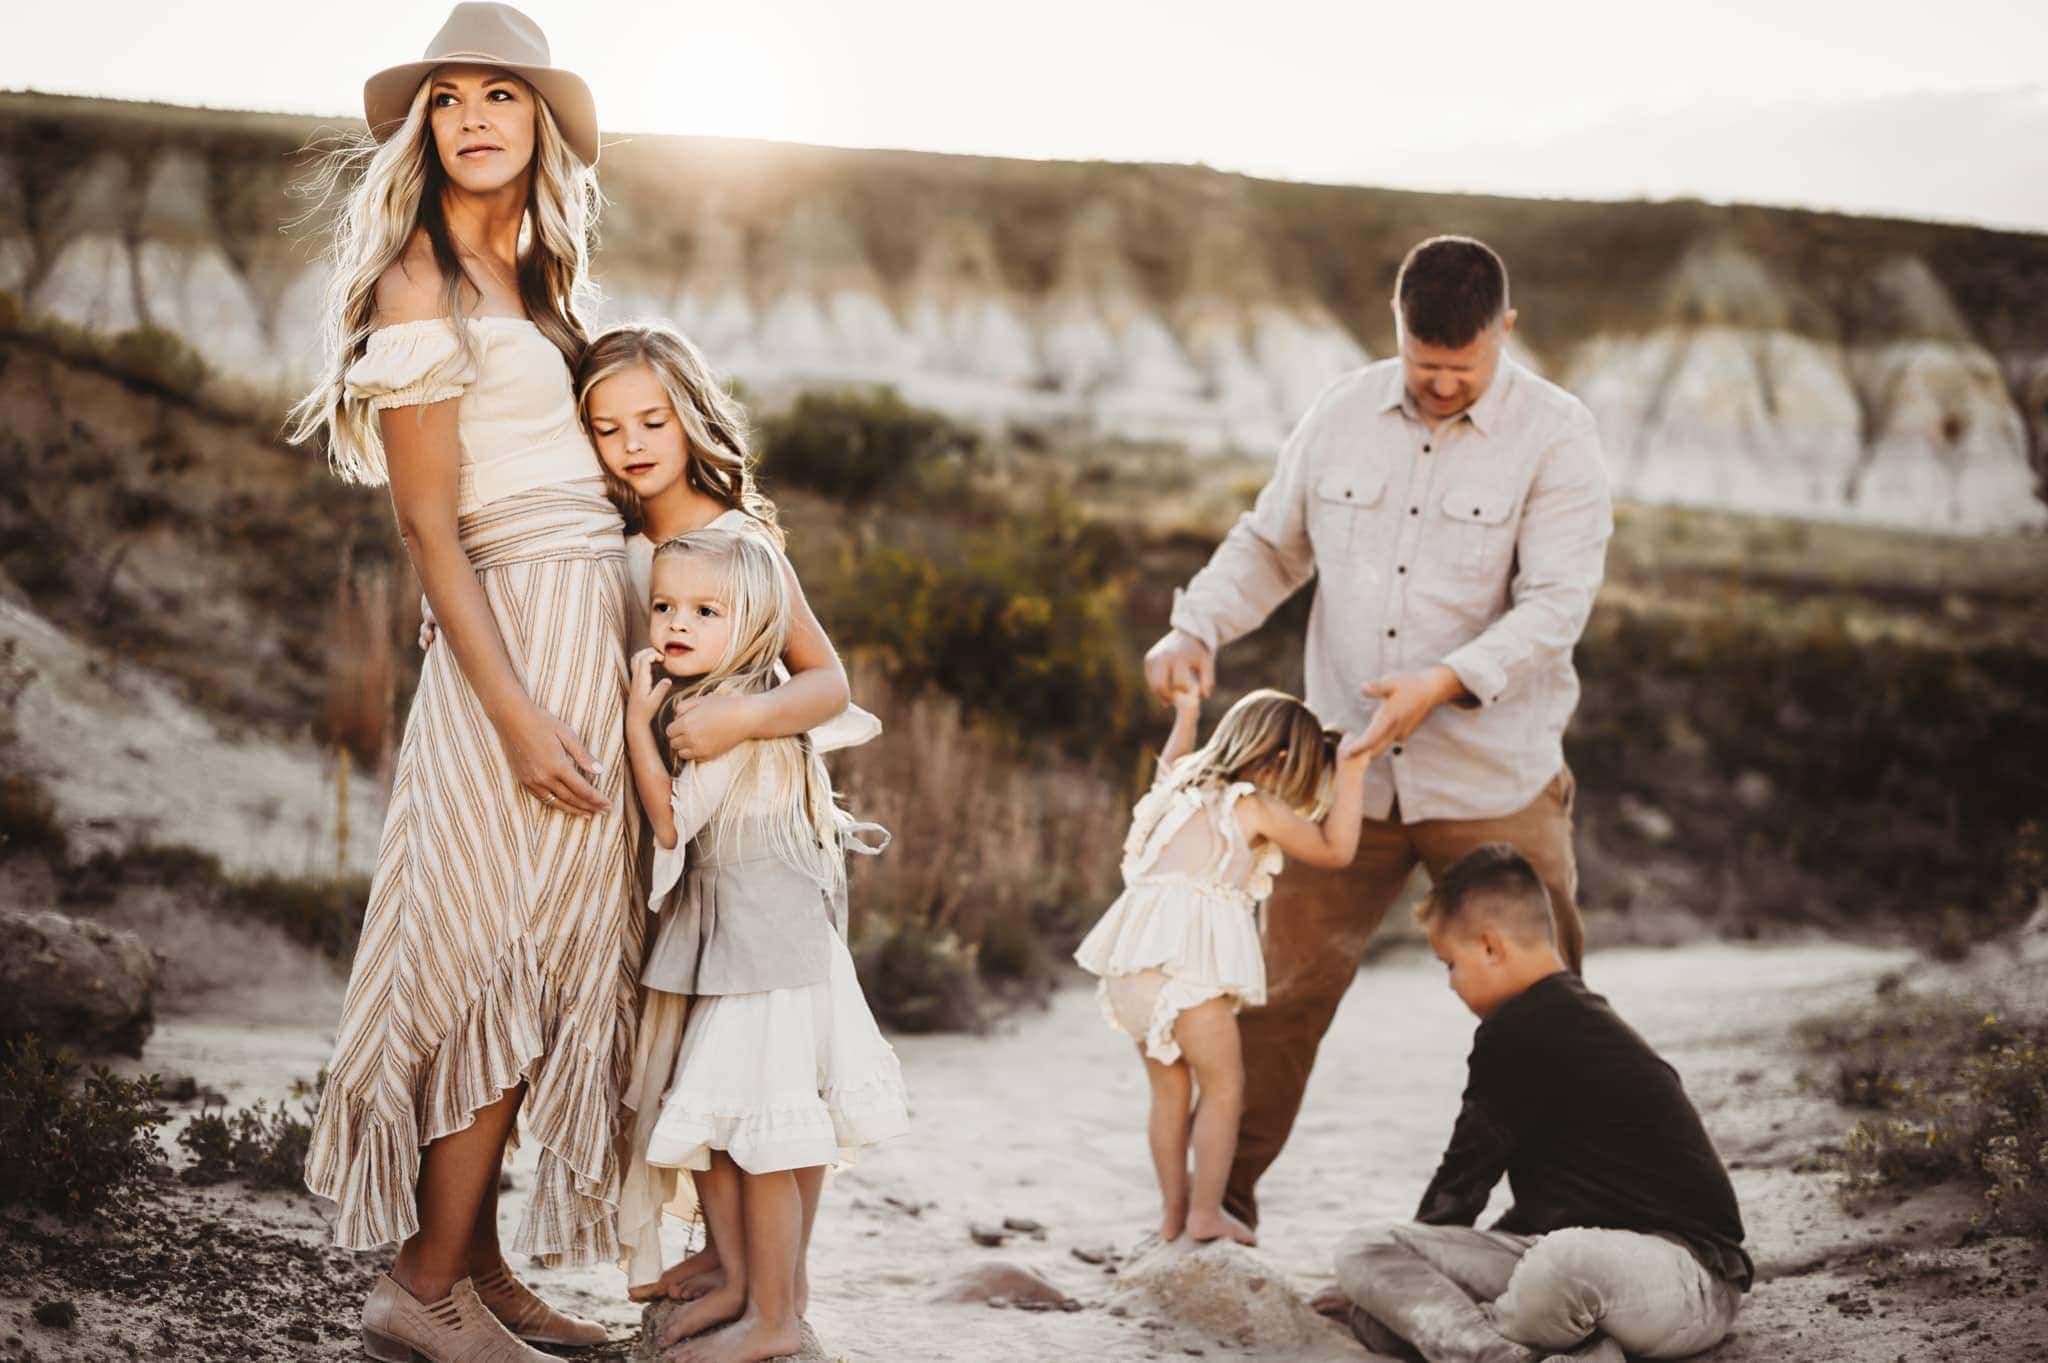 striped 1 70+ Best Chosen Family Photo Outfit Ideas in Summer - 56